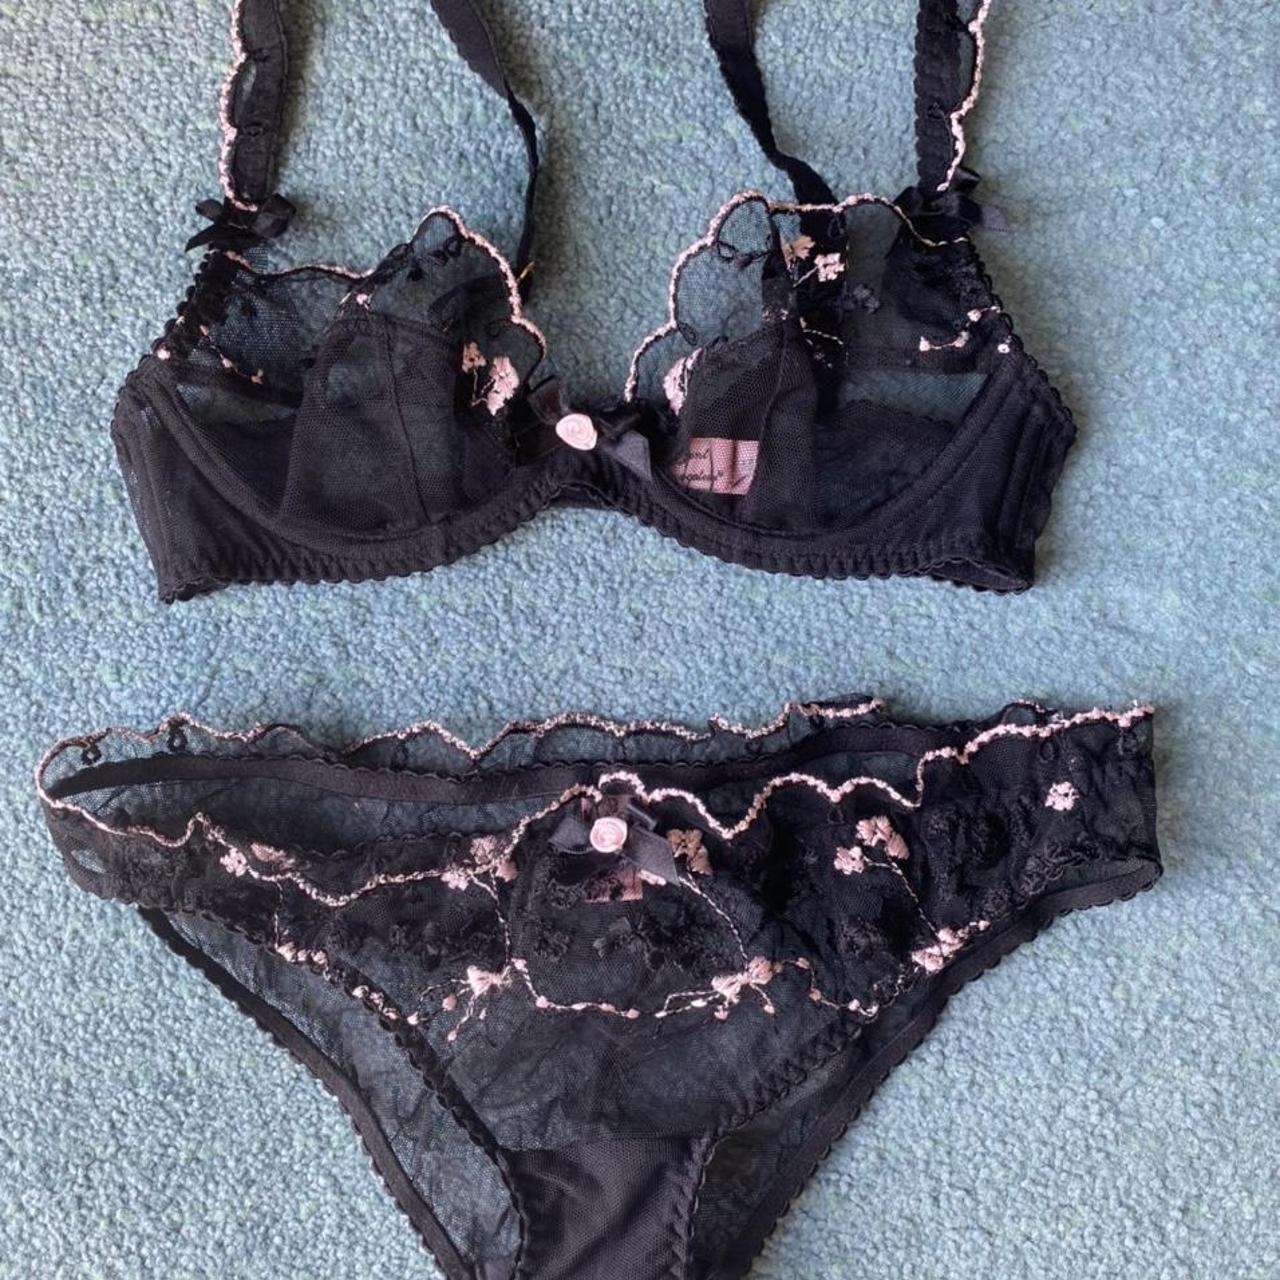 Agent Provocateur and Briefs Never worn without... Depop